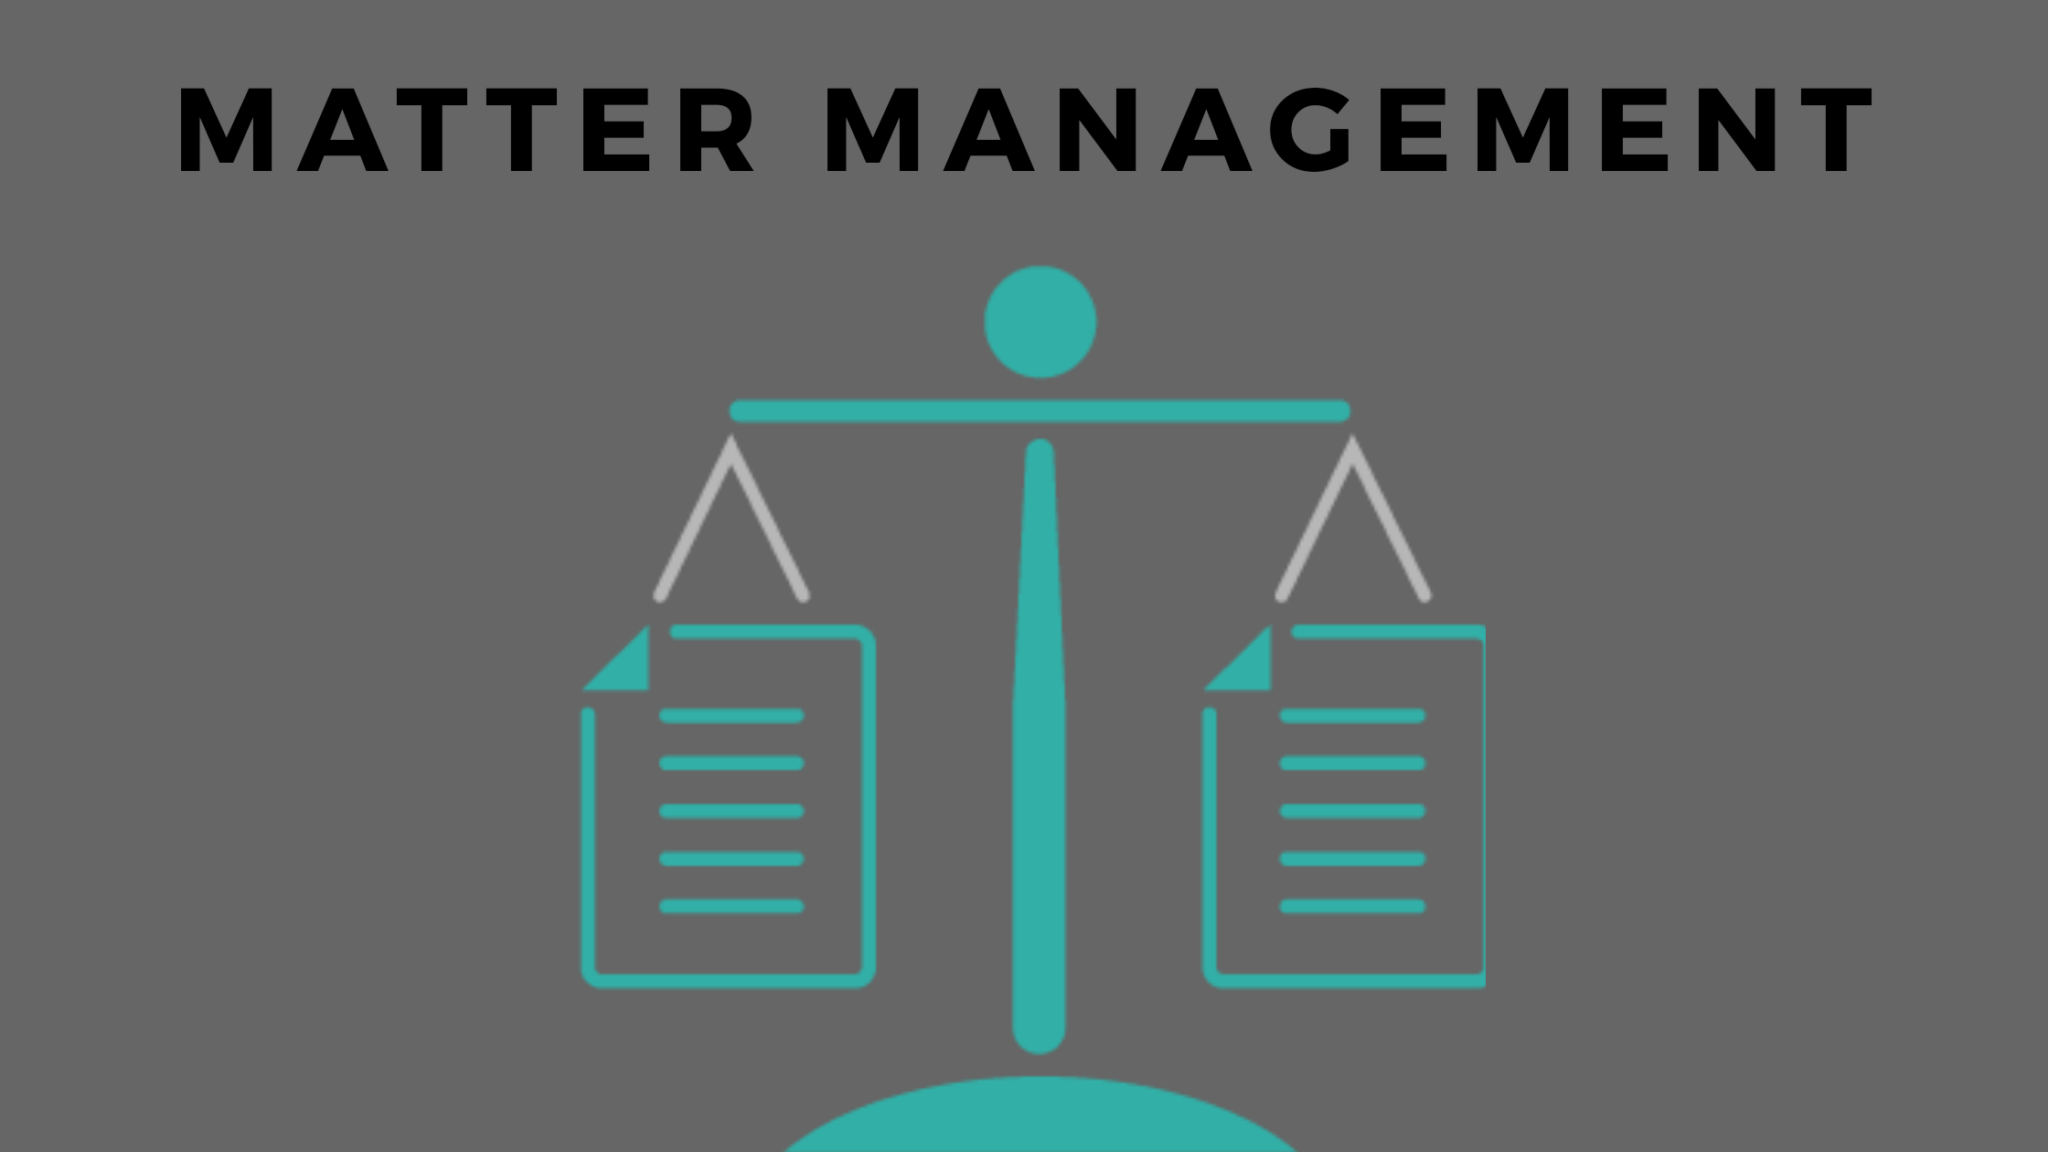 What challenges are driving corporate legal towards matter management ...